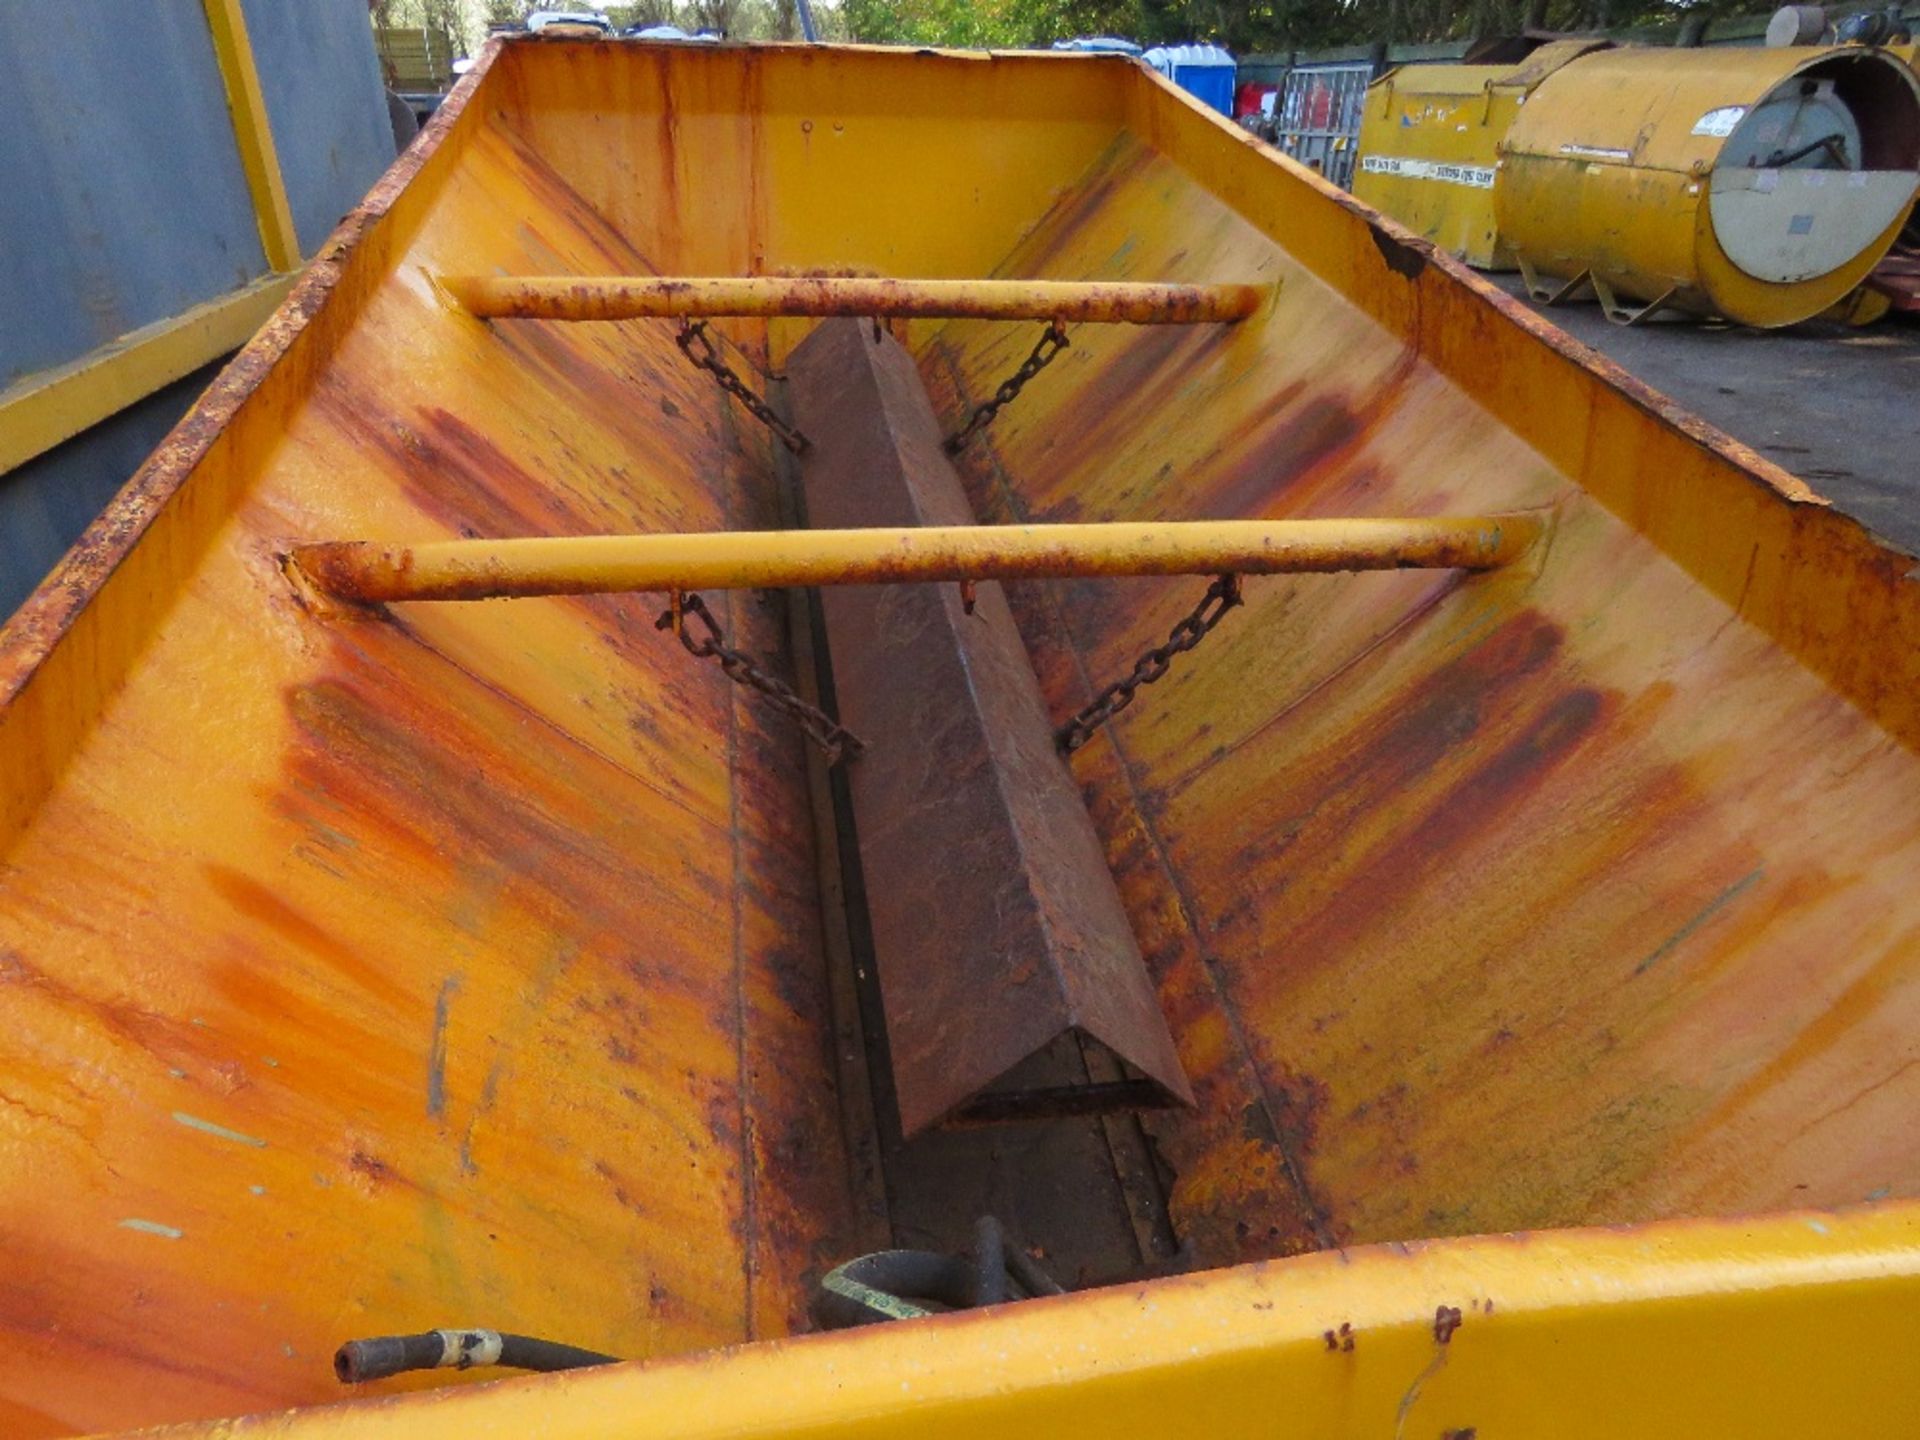 GRITTER BODY ON HL5 FRAME, 10FT LENGTH APPROX. SUITABLE FOR 7.5 TONNE HOOK LOADER LORRY. - Image 4 of 8